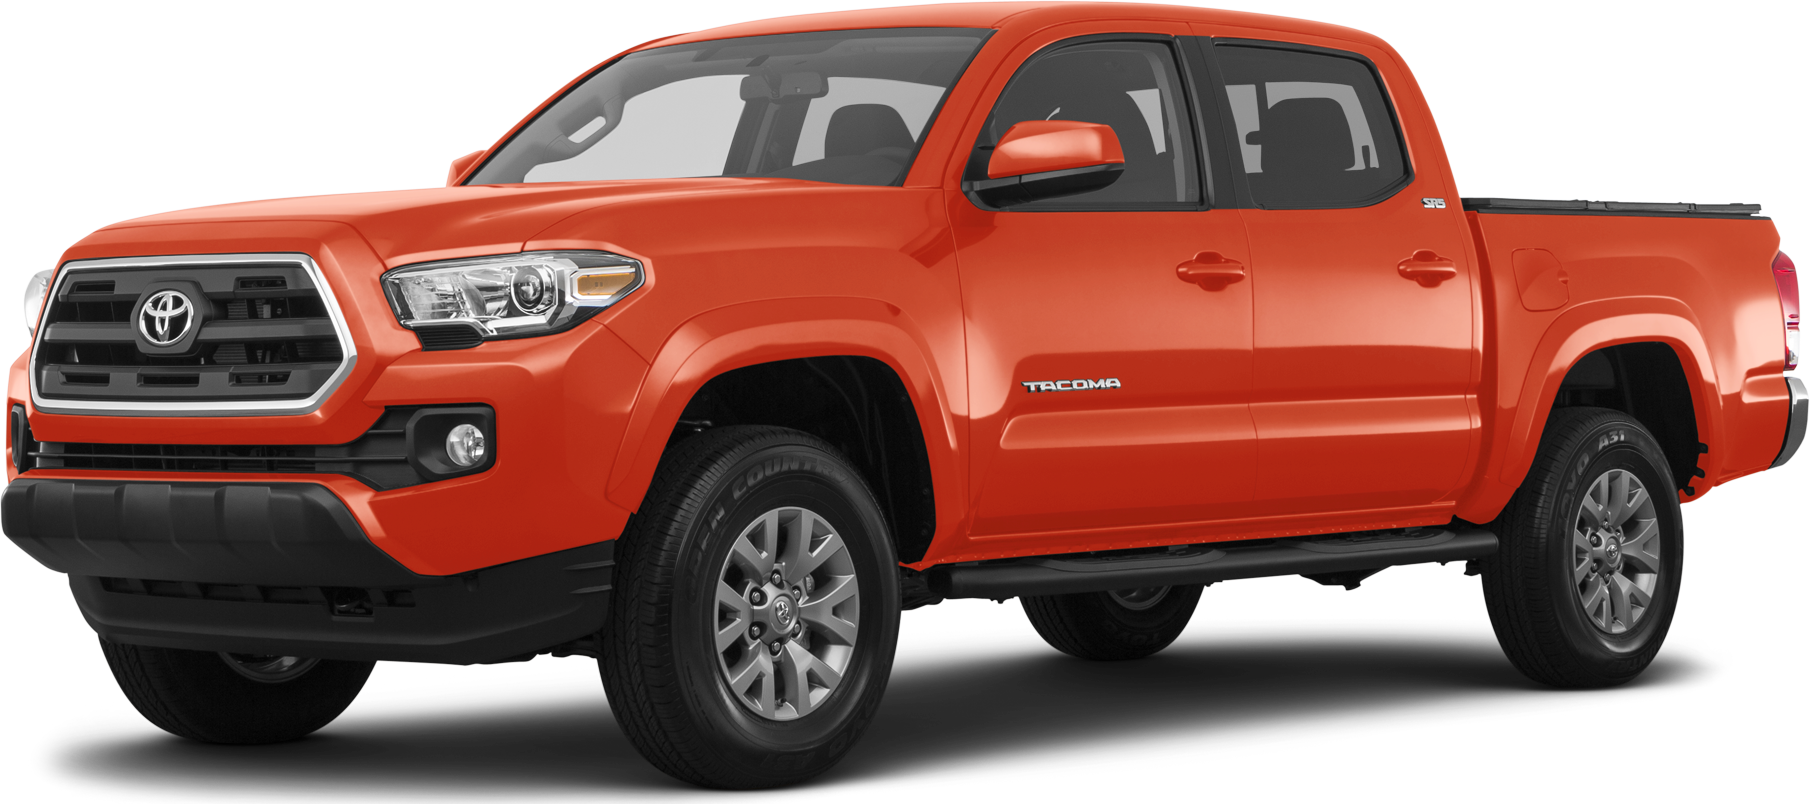 2018 Toyota Tacoma Double Cab Values And Cars For Sale Kelley Blue Book